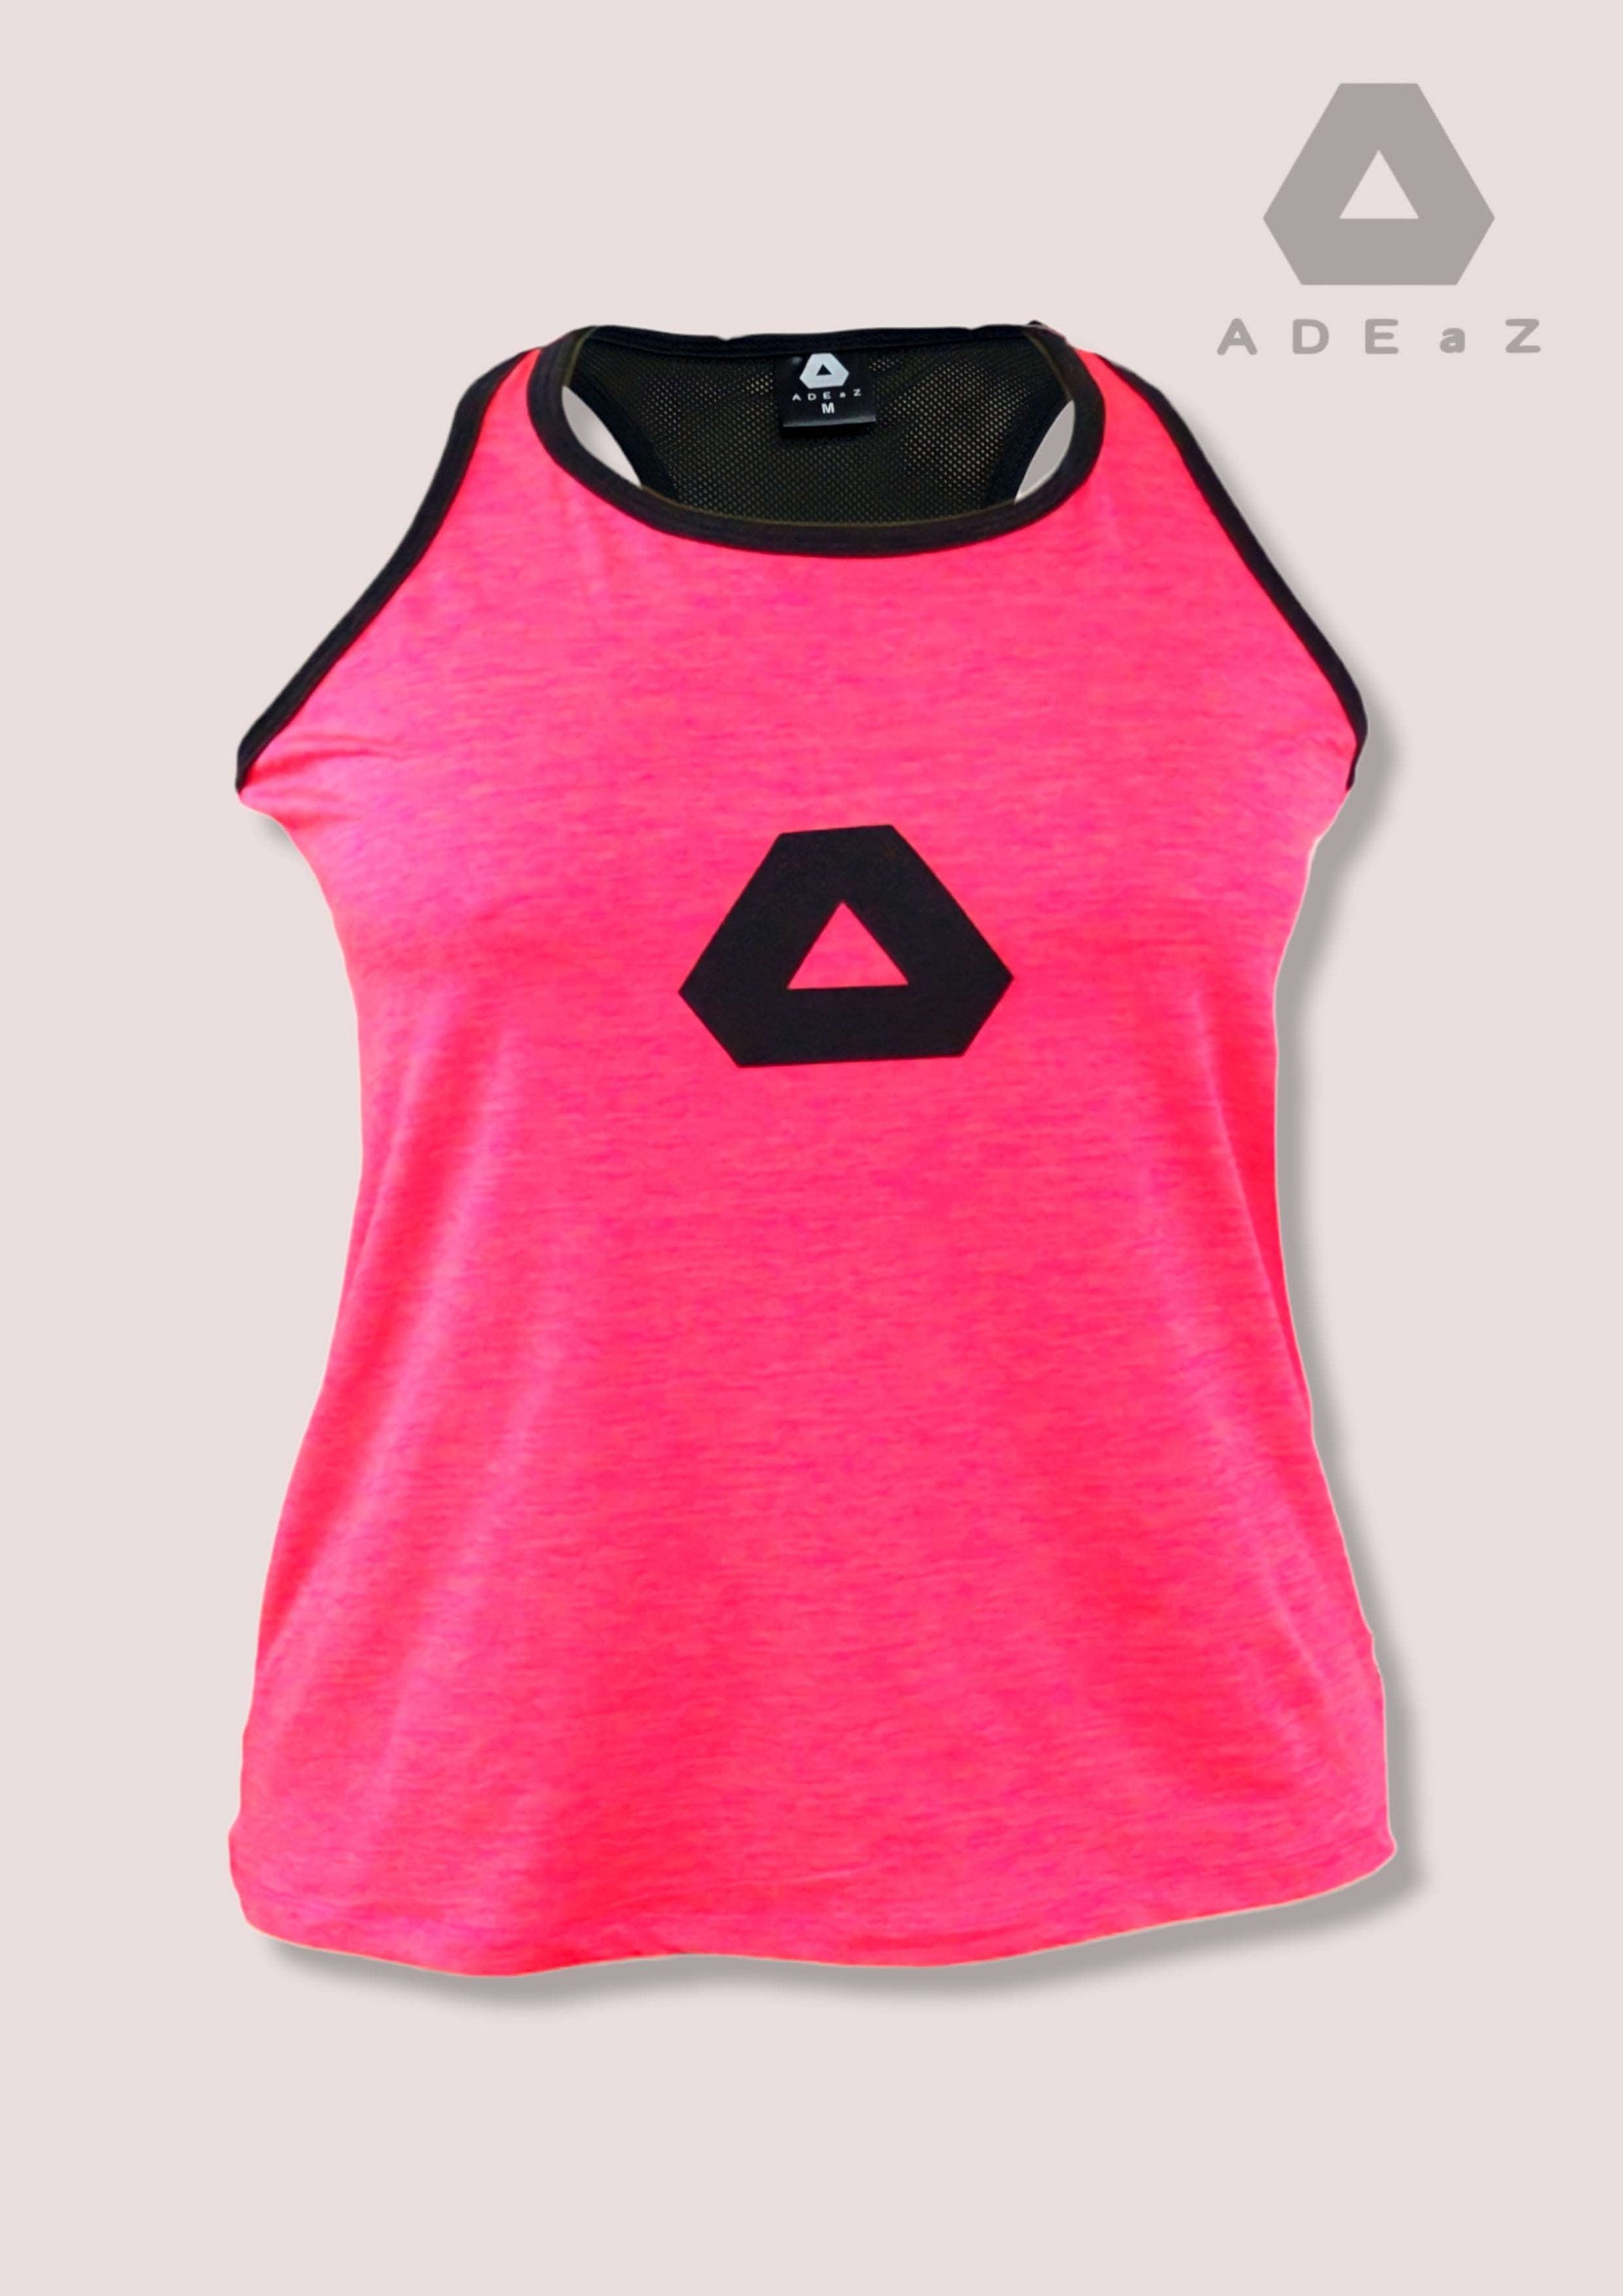 Women's racerback tank top , offering a comfortable fit and sporty style for various occasions.